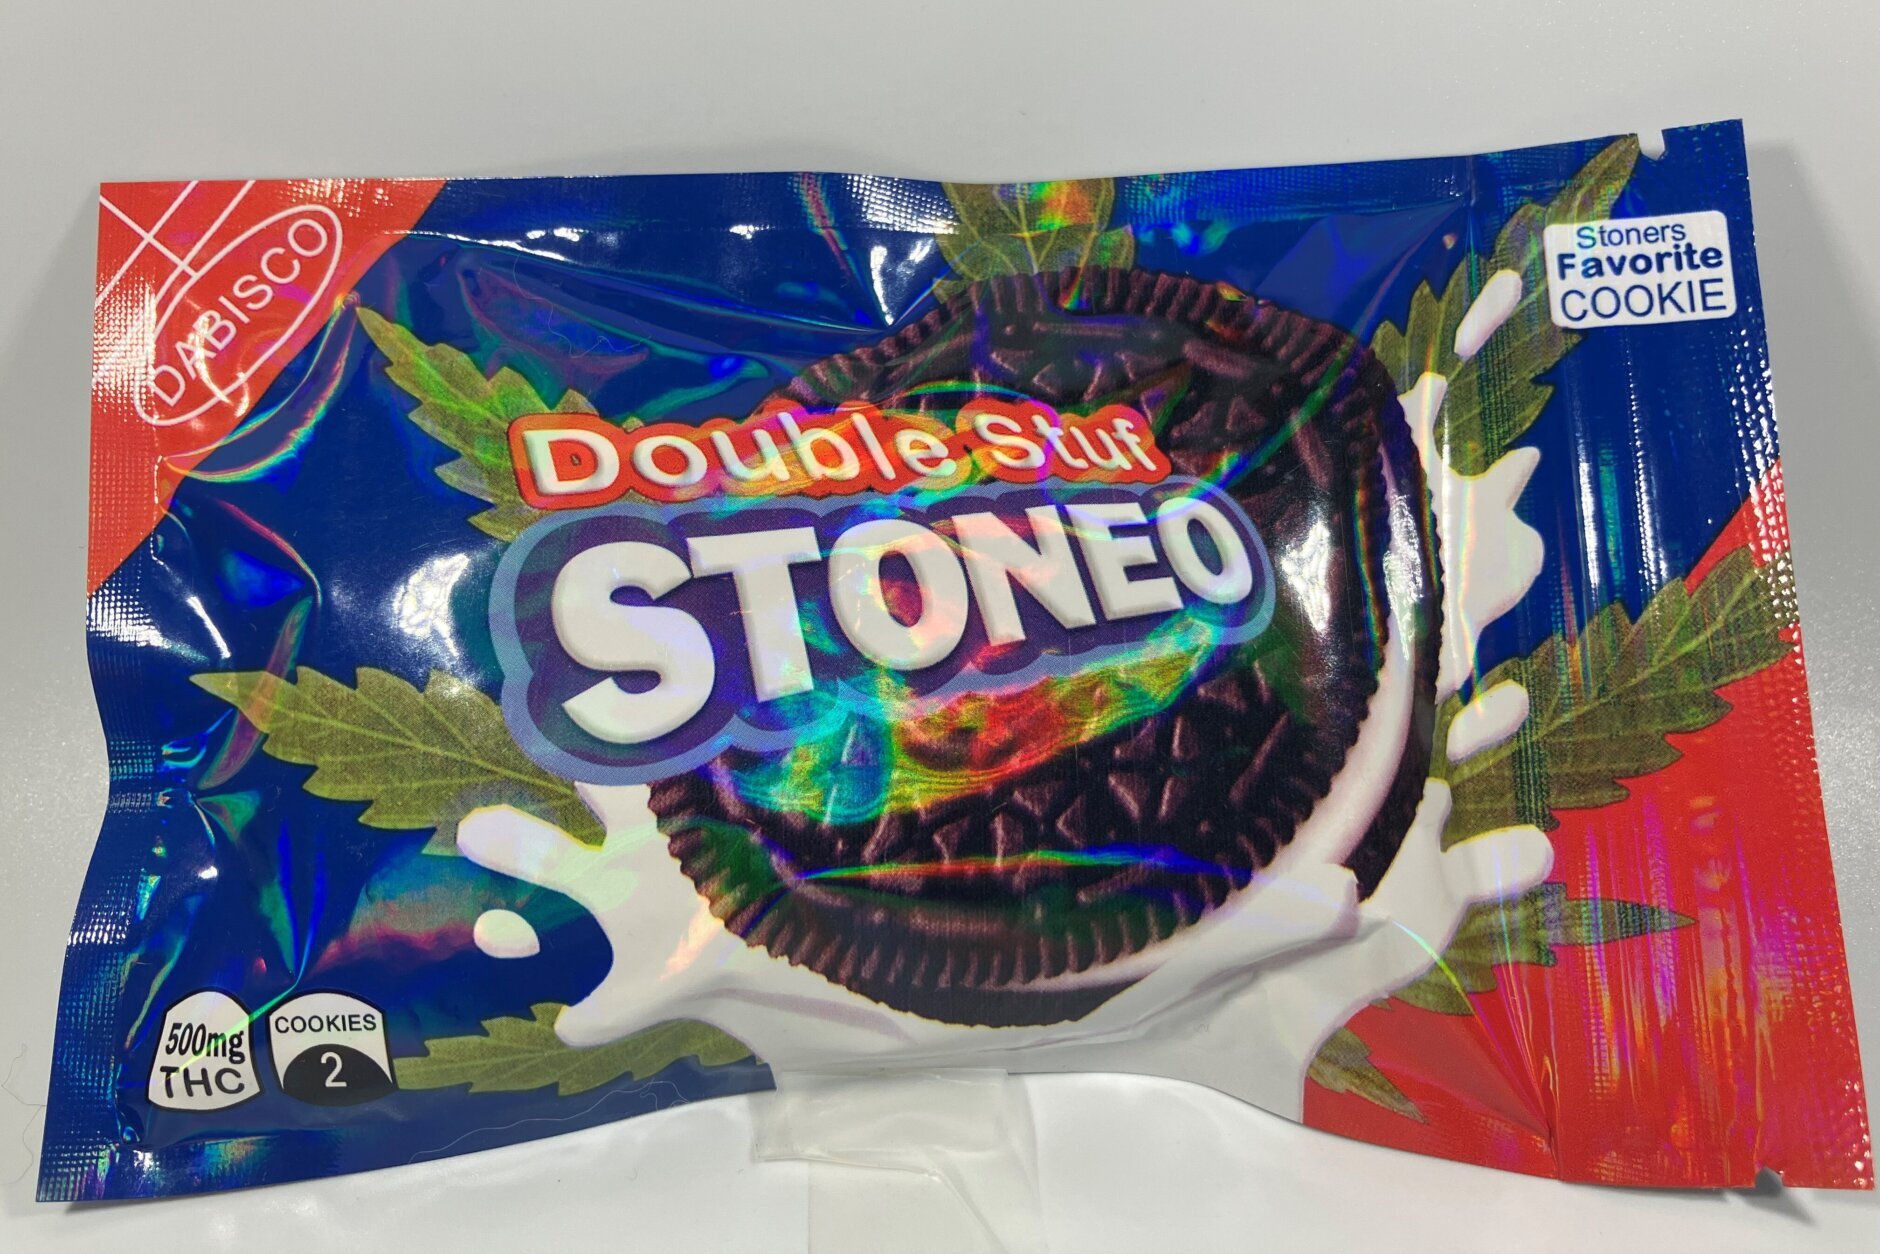 Package of THC-infused cookies that closely resemble Oreo cookies.